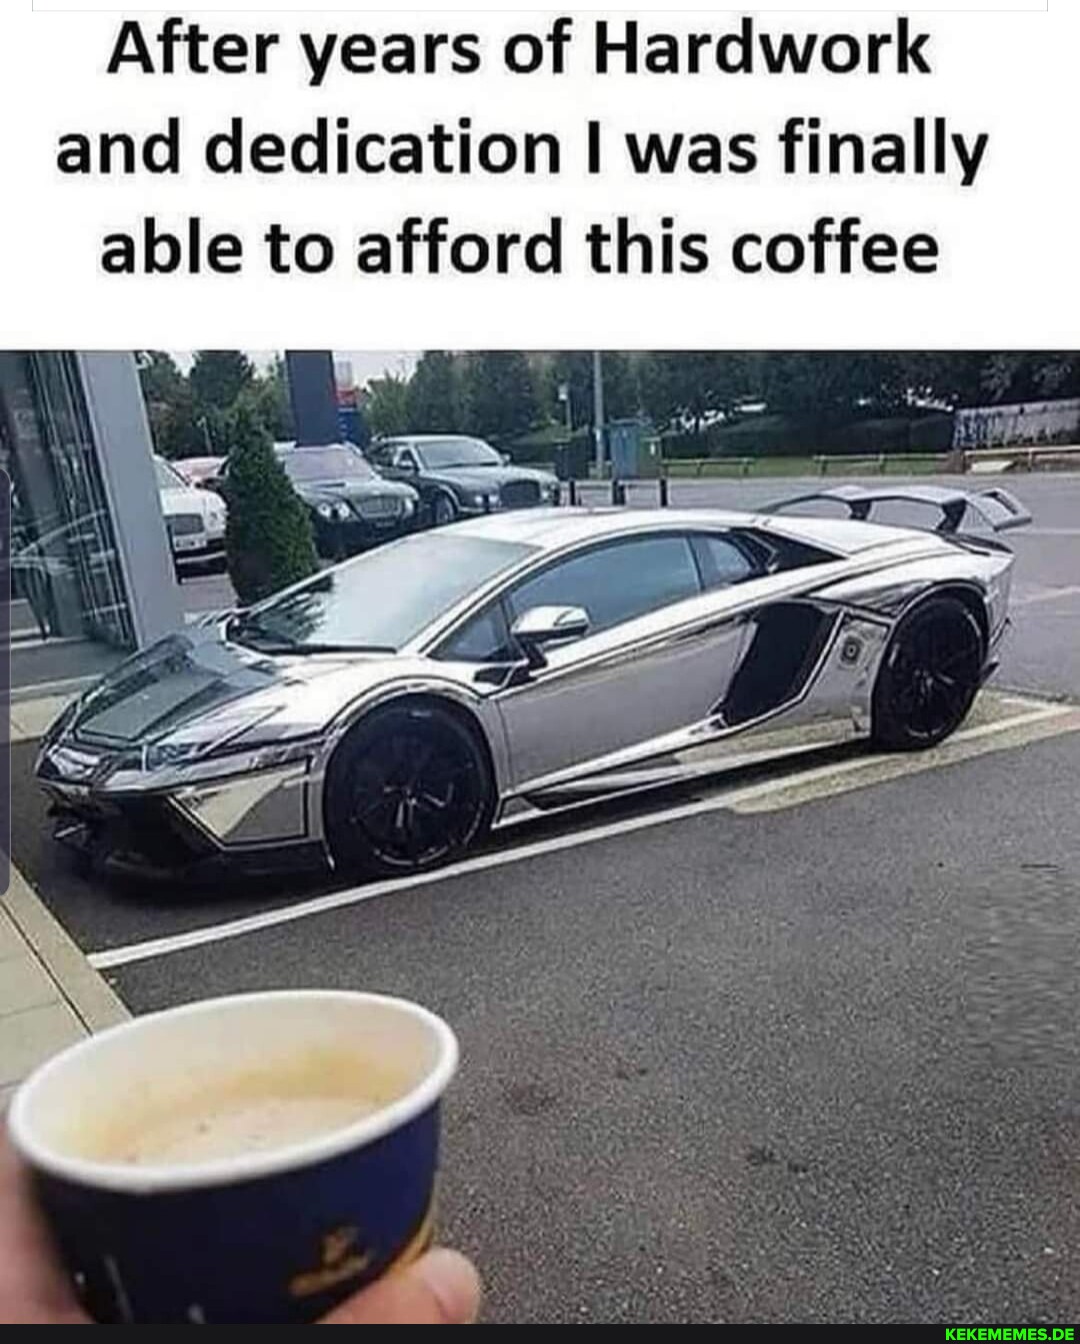 After years of Hardwork and dedication I was finally able to afford this coffee